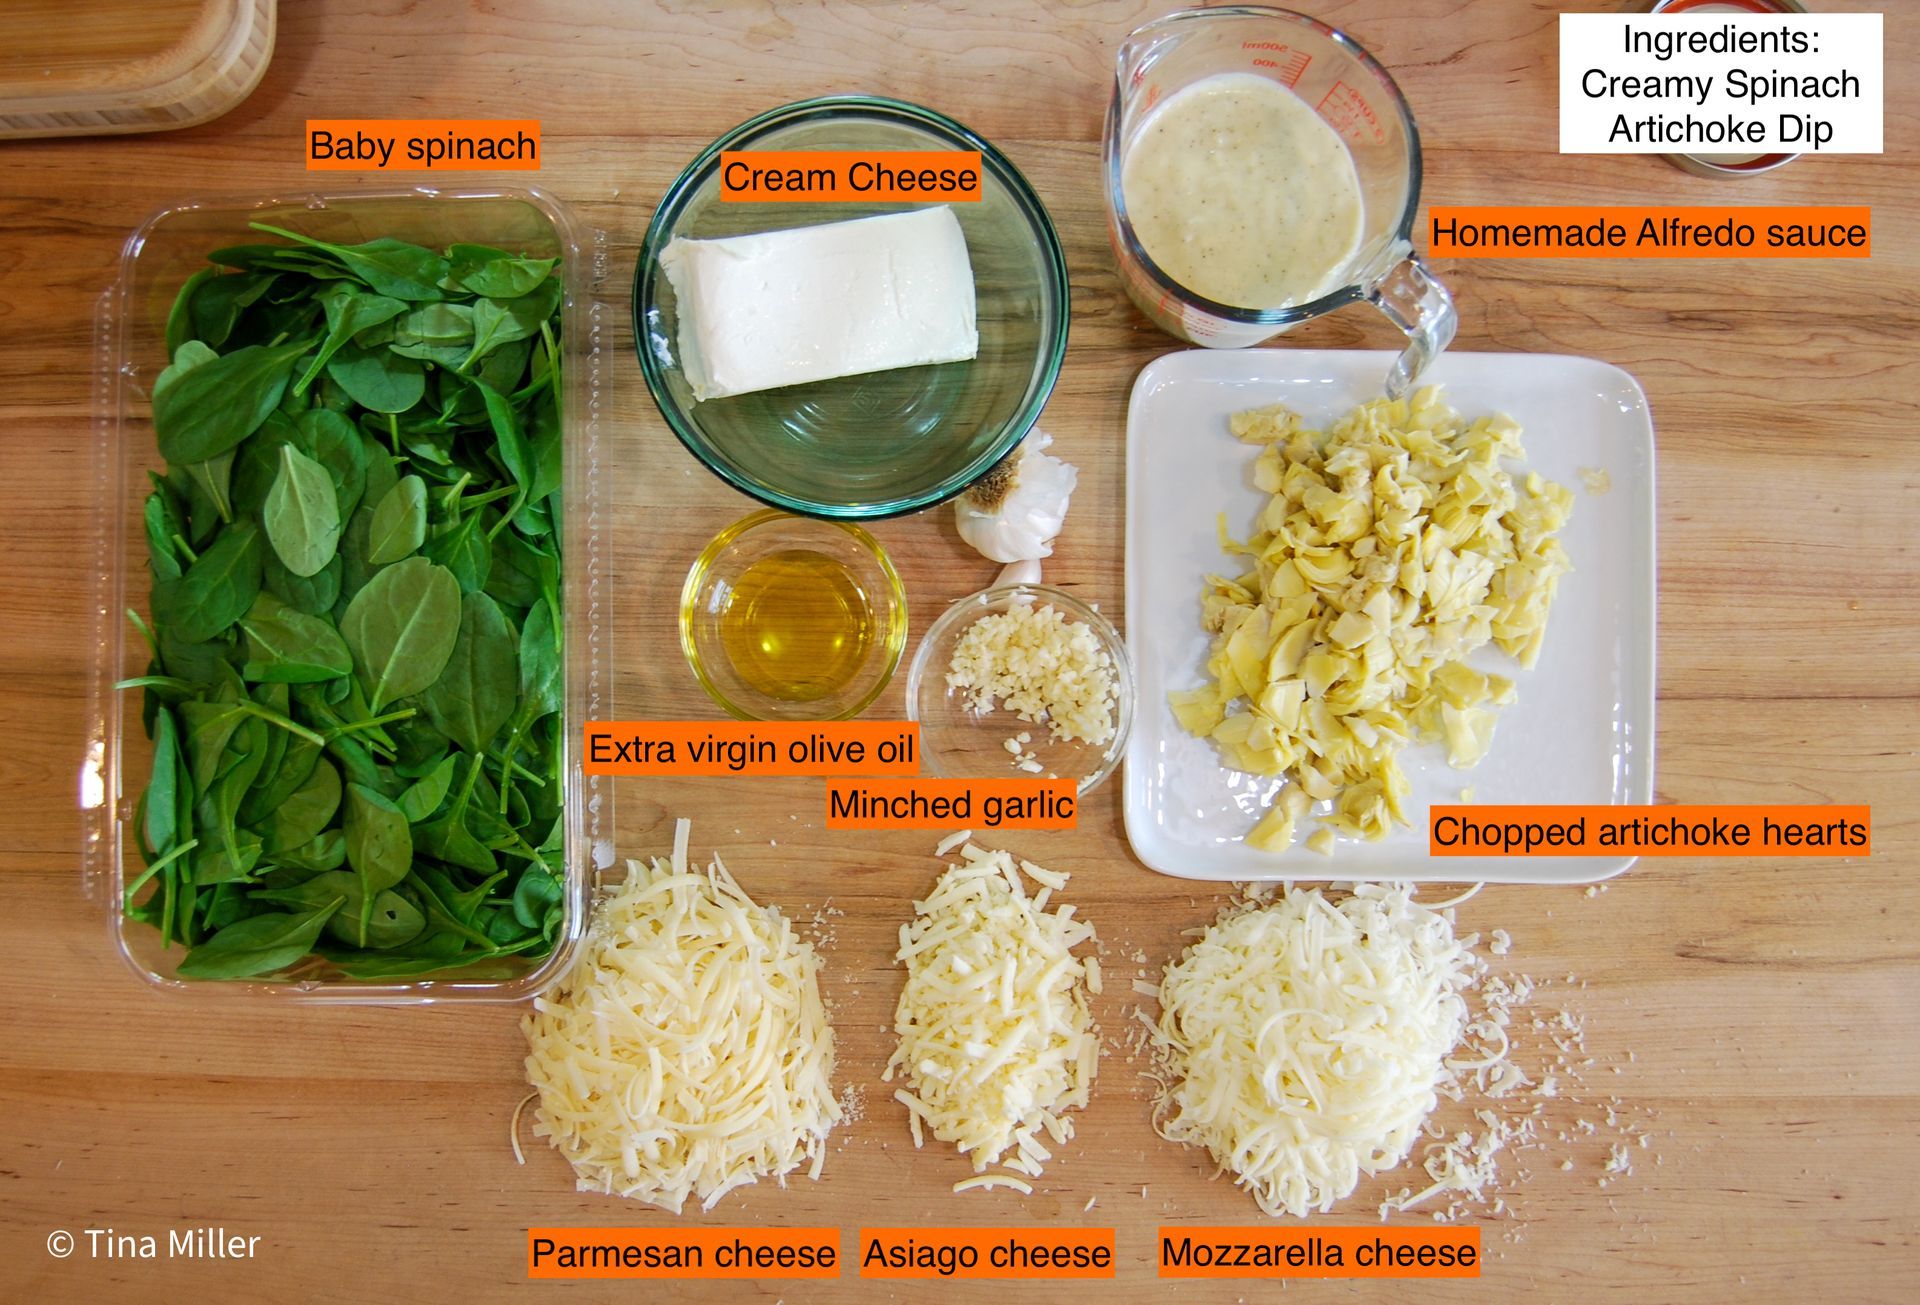 Ingredients for making spinach and artichoke dip including spinach, cream cheese, and homemade Alfredo sauce.